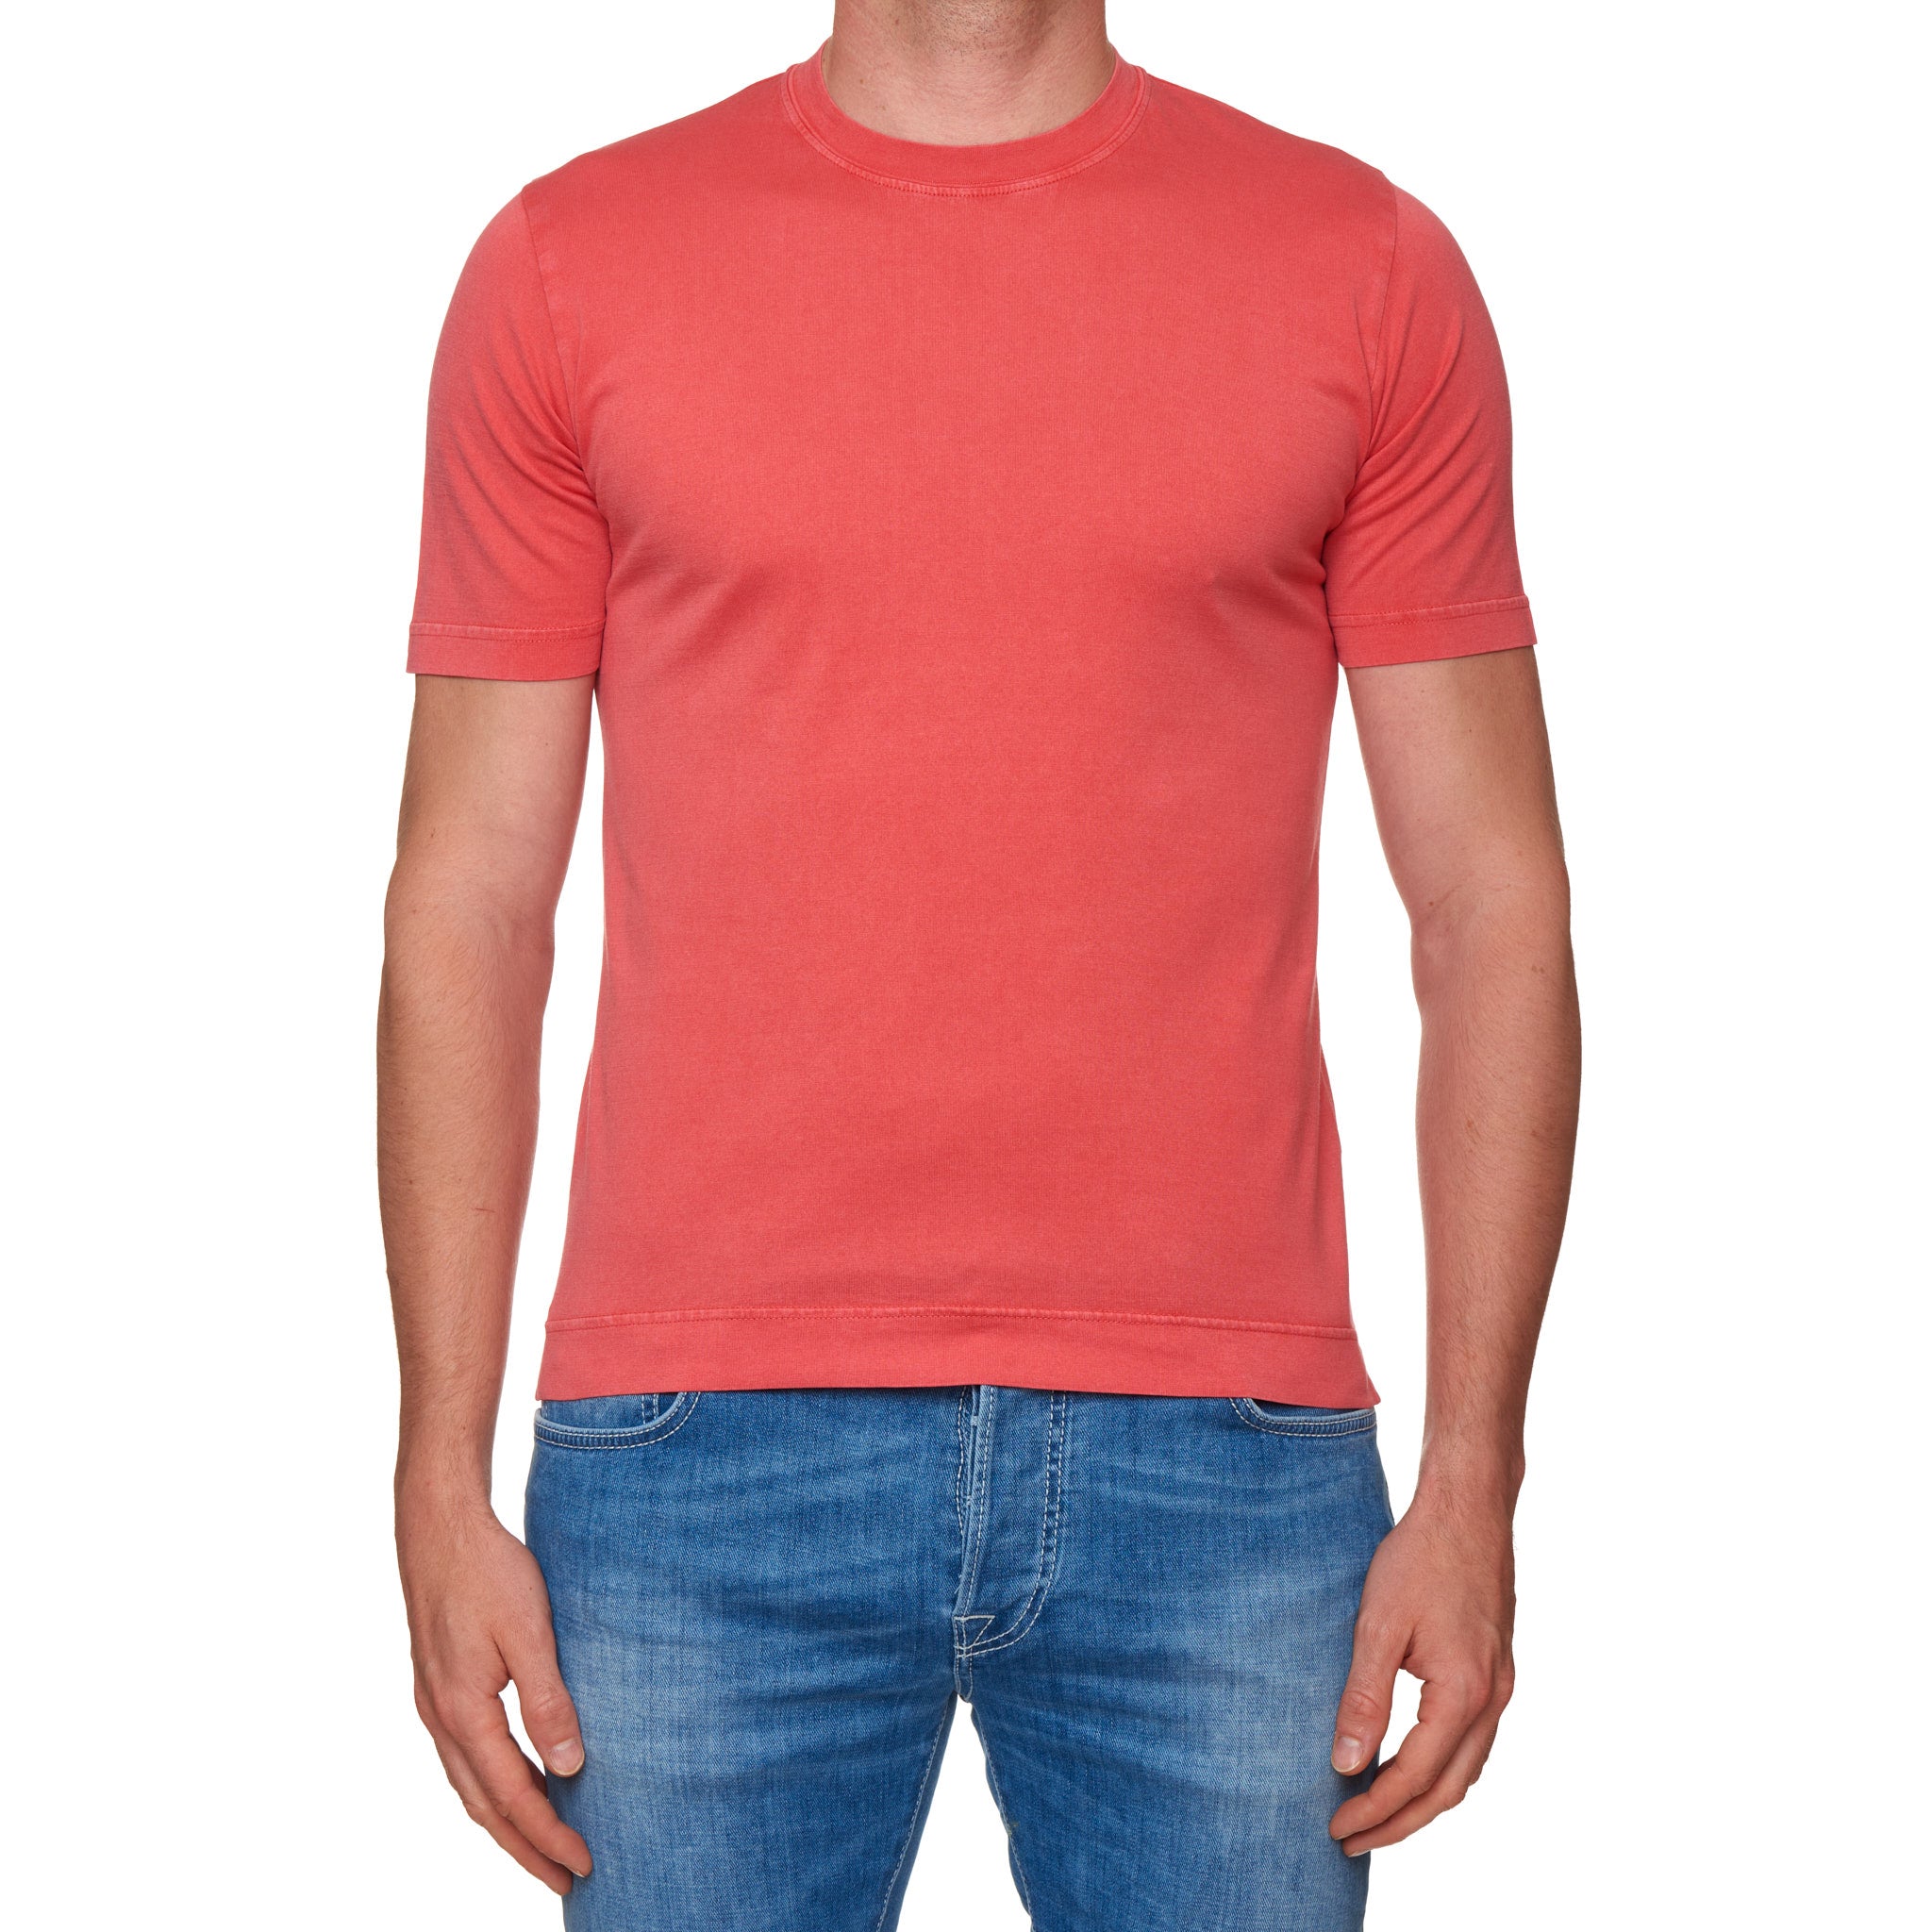 FEDELI "Extreme" Coral Cotton Frosted Short Sleeve T-Shirt EU 48 NEW US S FEDELI